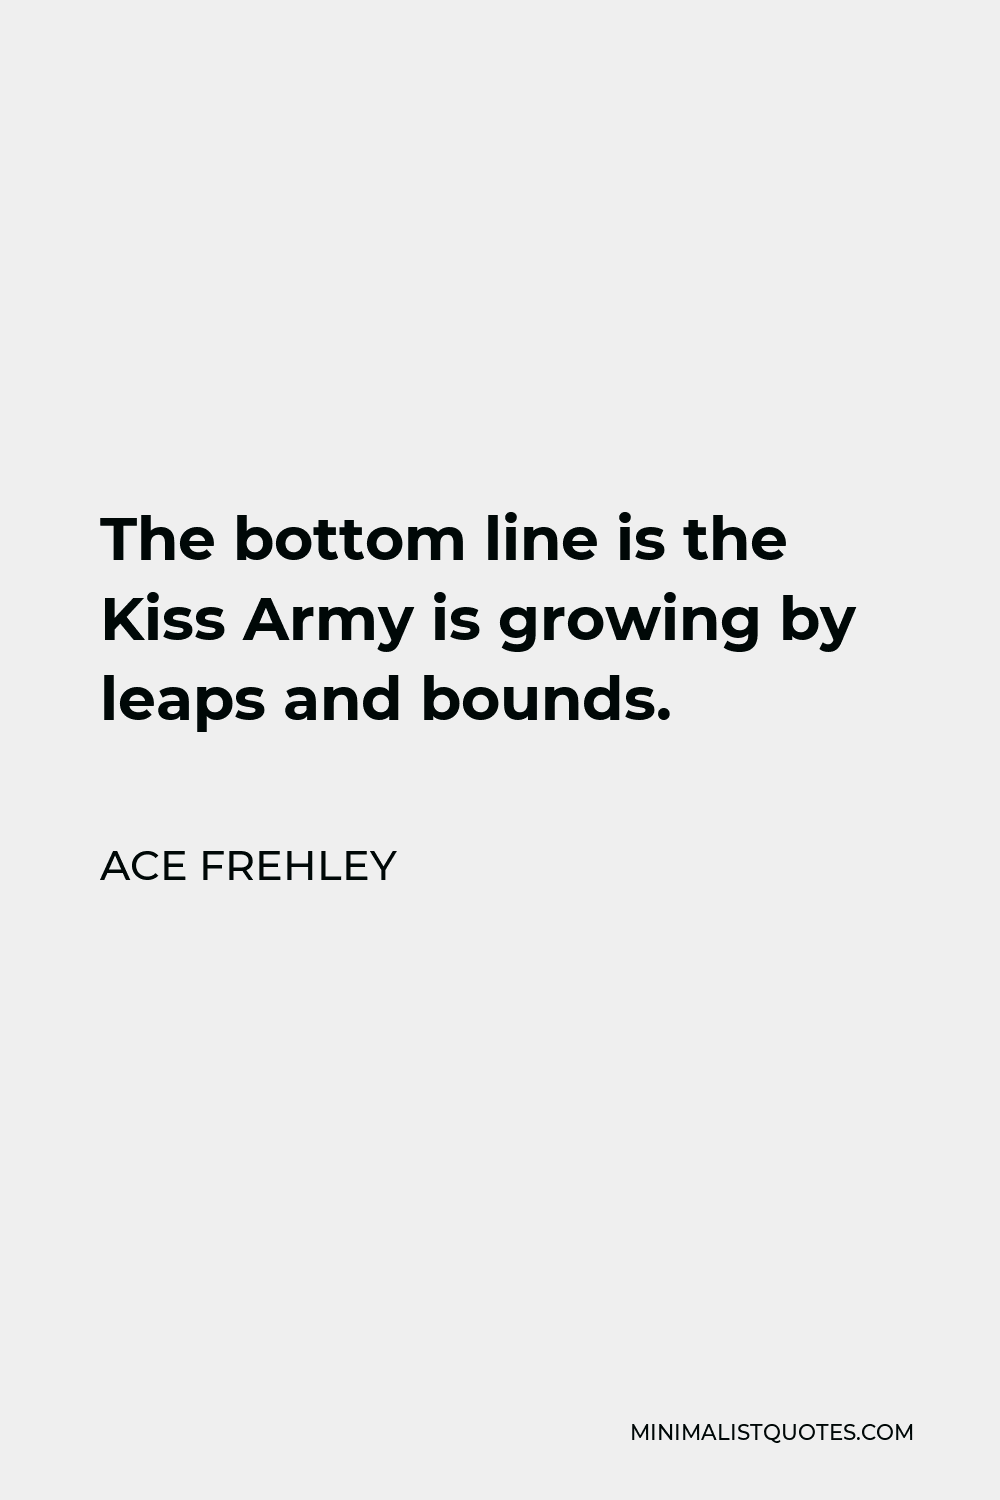 Ace Frehley Quote - The bottom line is the Kiss Army is growing by leaps and bounds.